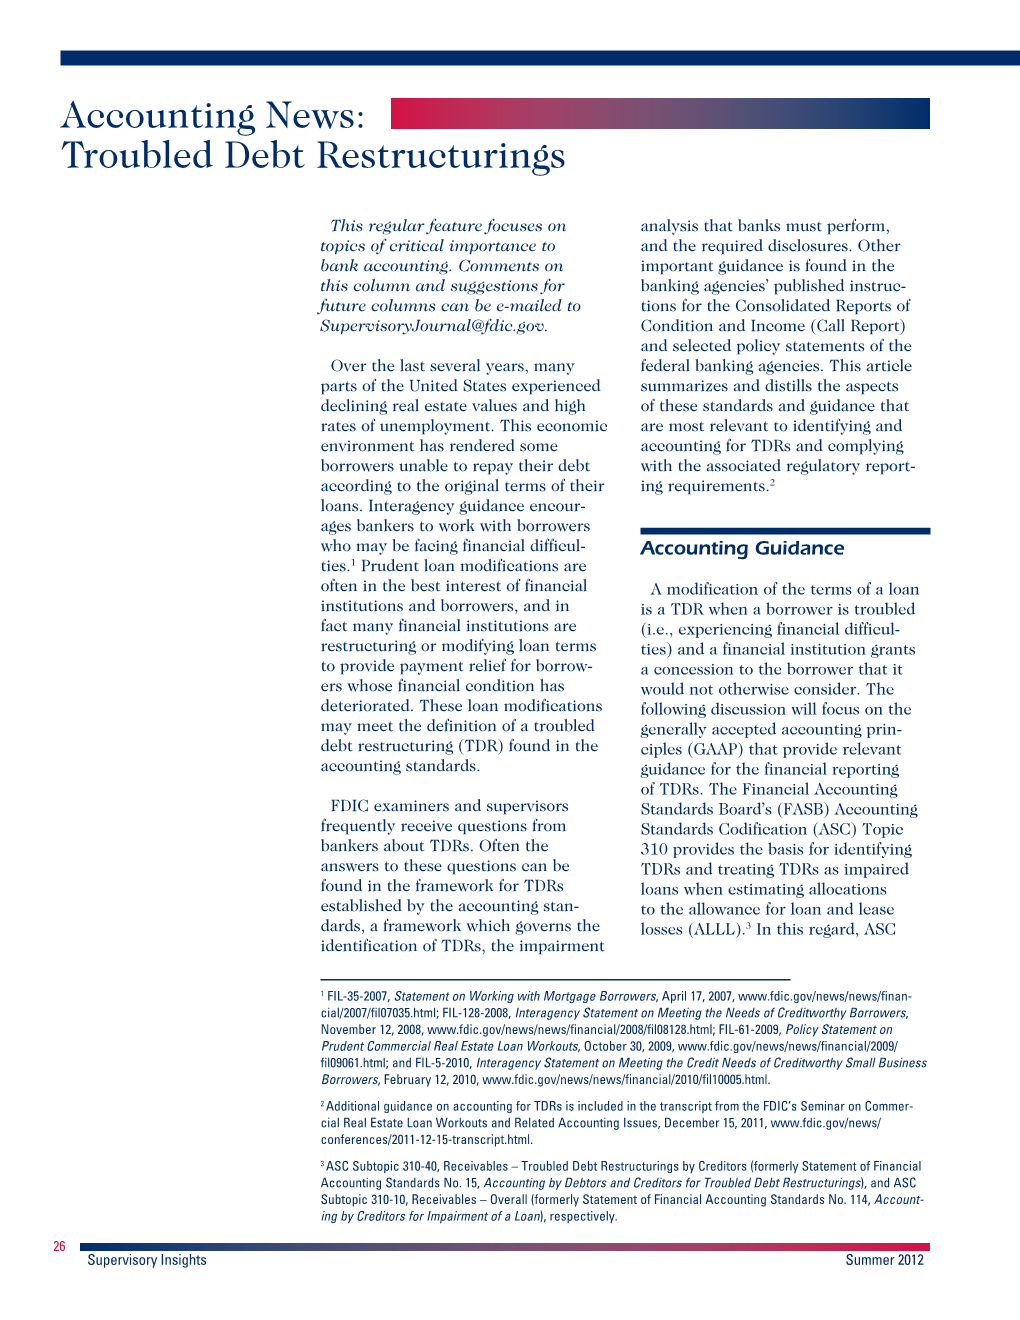 Accounting News: Troubled Debt Restructurings